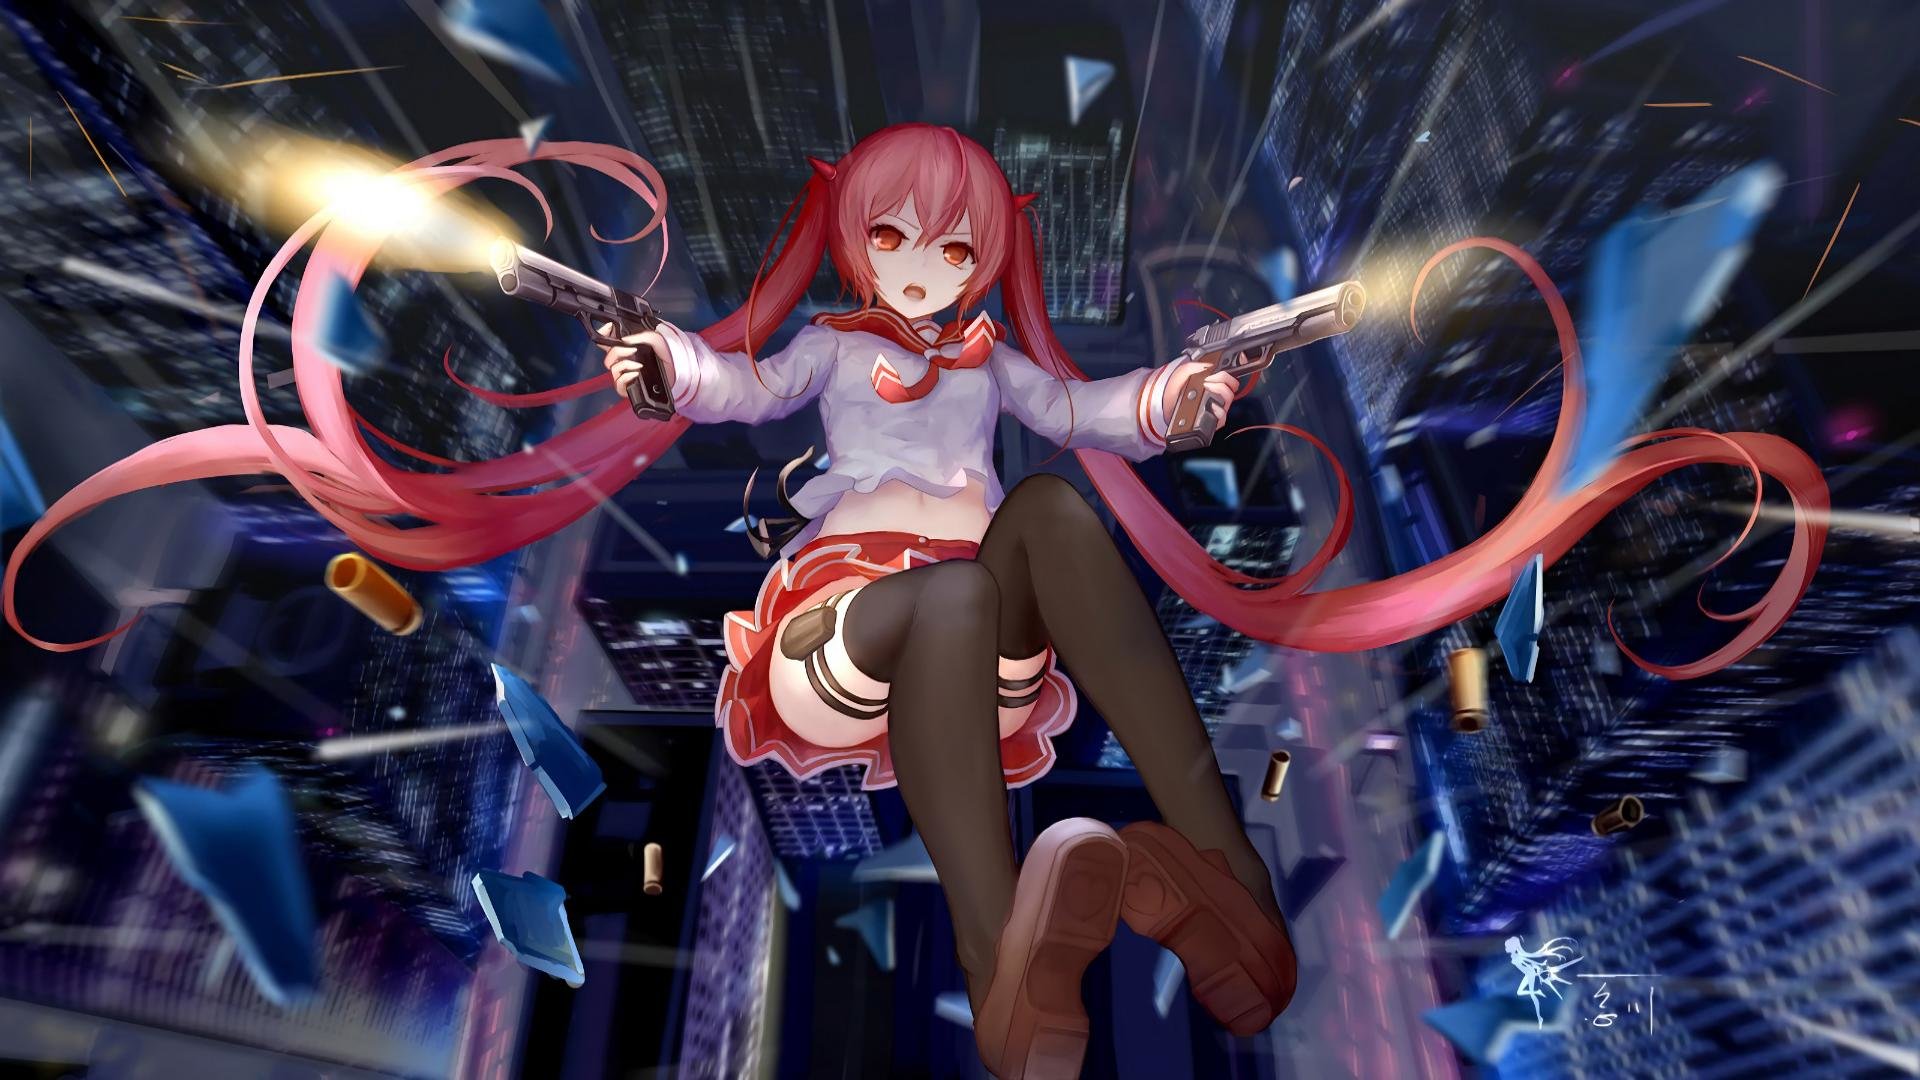 Best Aria The Scarlet Ammo wallpaper ID:446940 for High Resolution 1080p computer